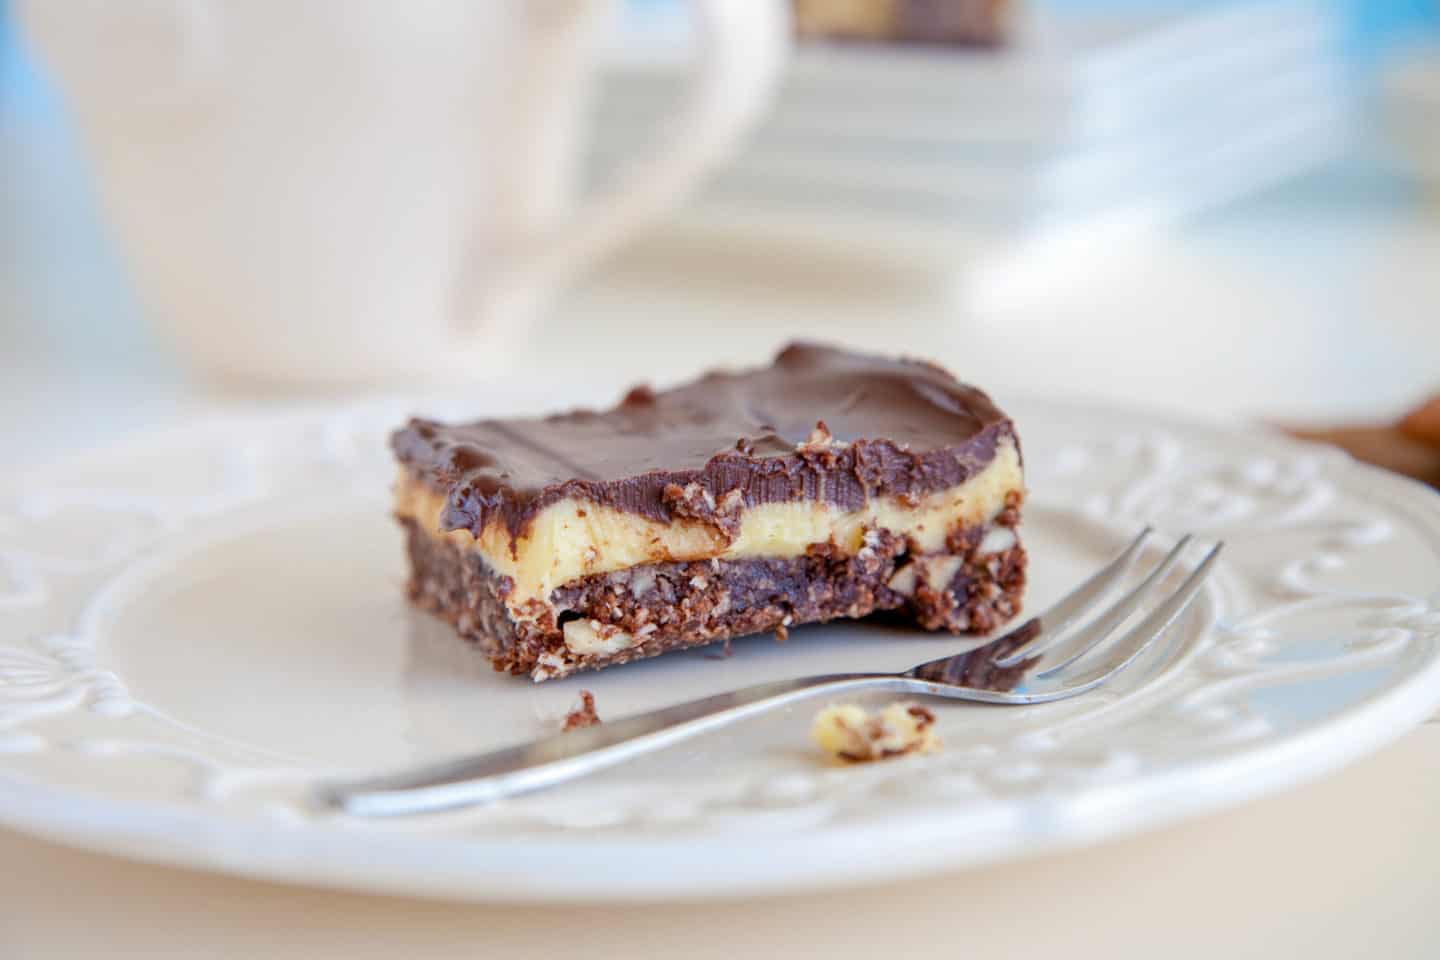 A Nanaimo Bar is one of the traditional Canadian foods you have to try